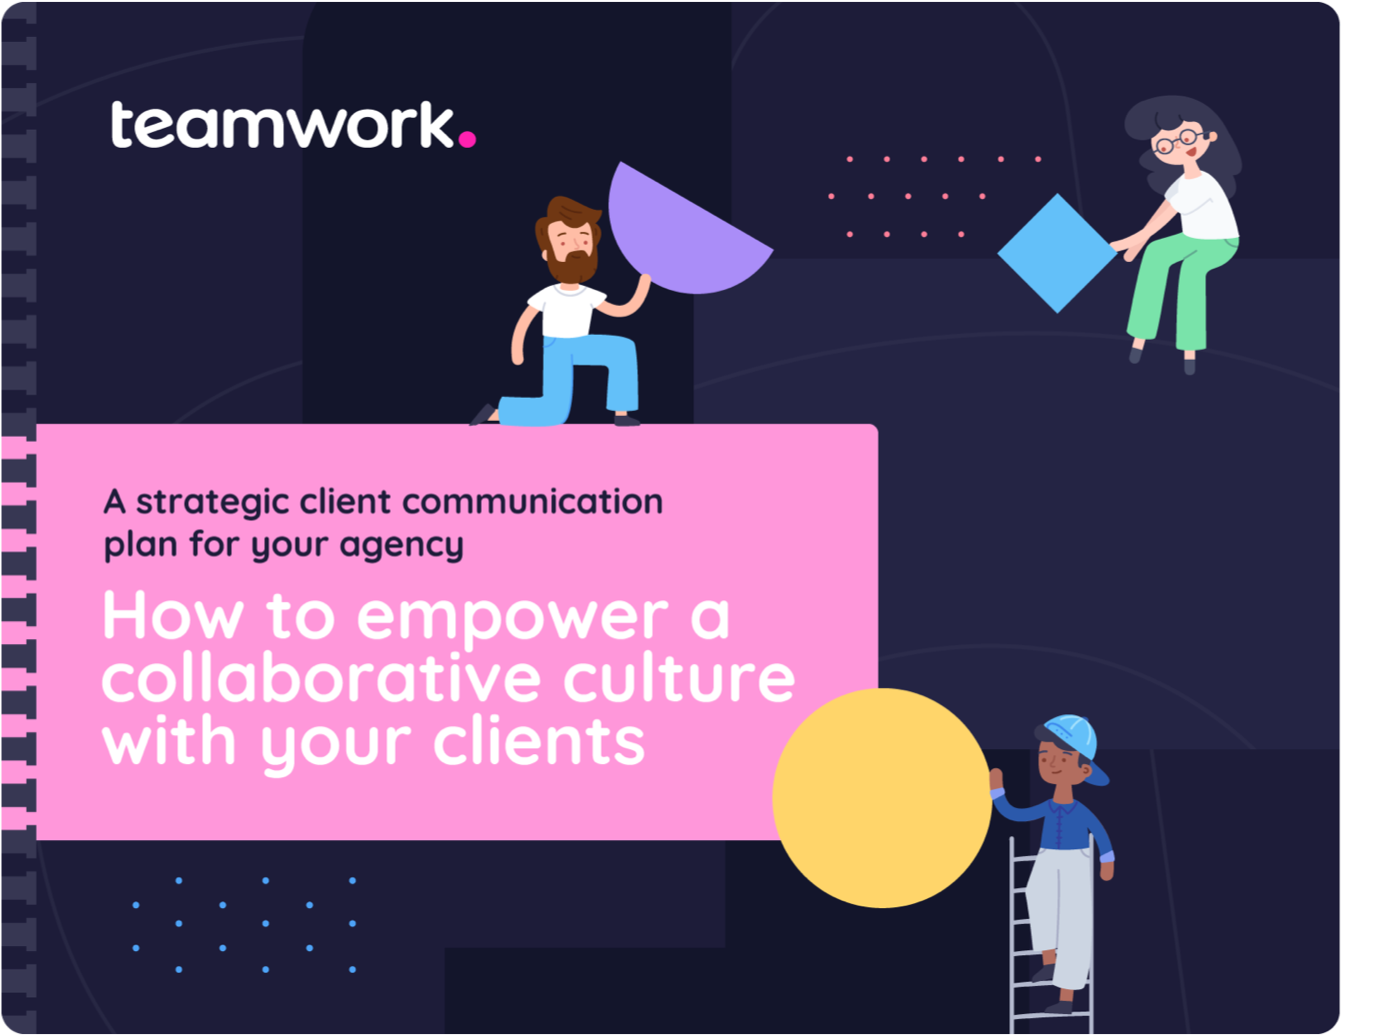 How to empower a collaborative culture with your clients